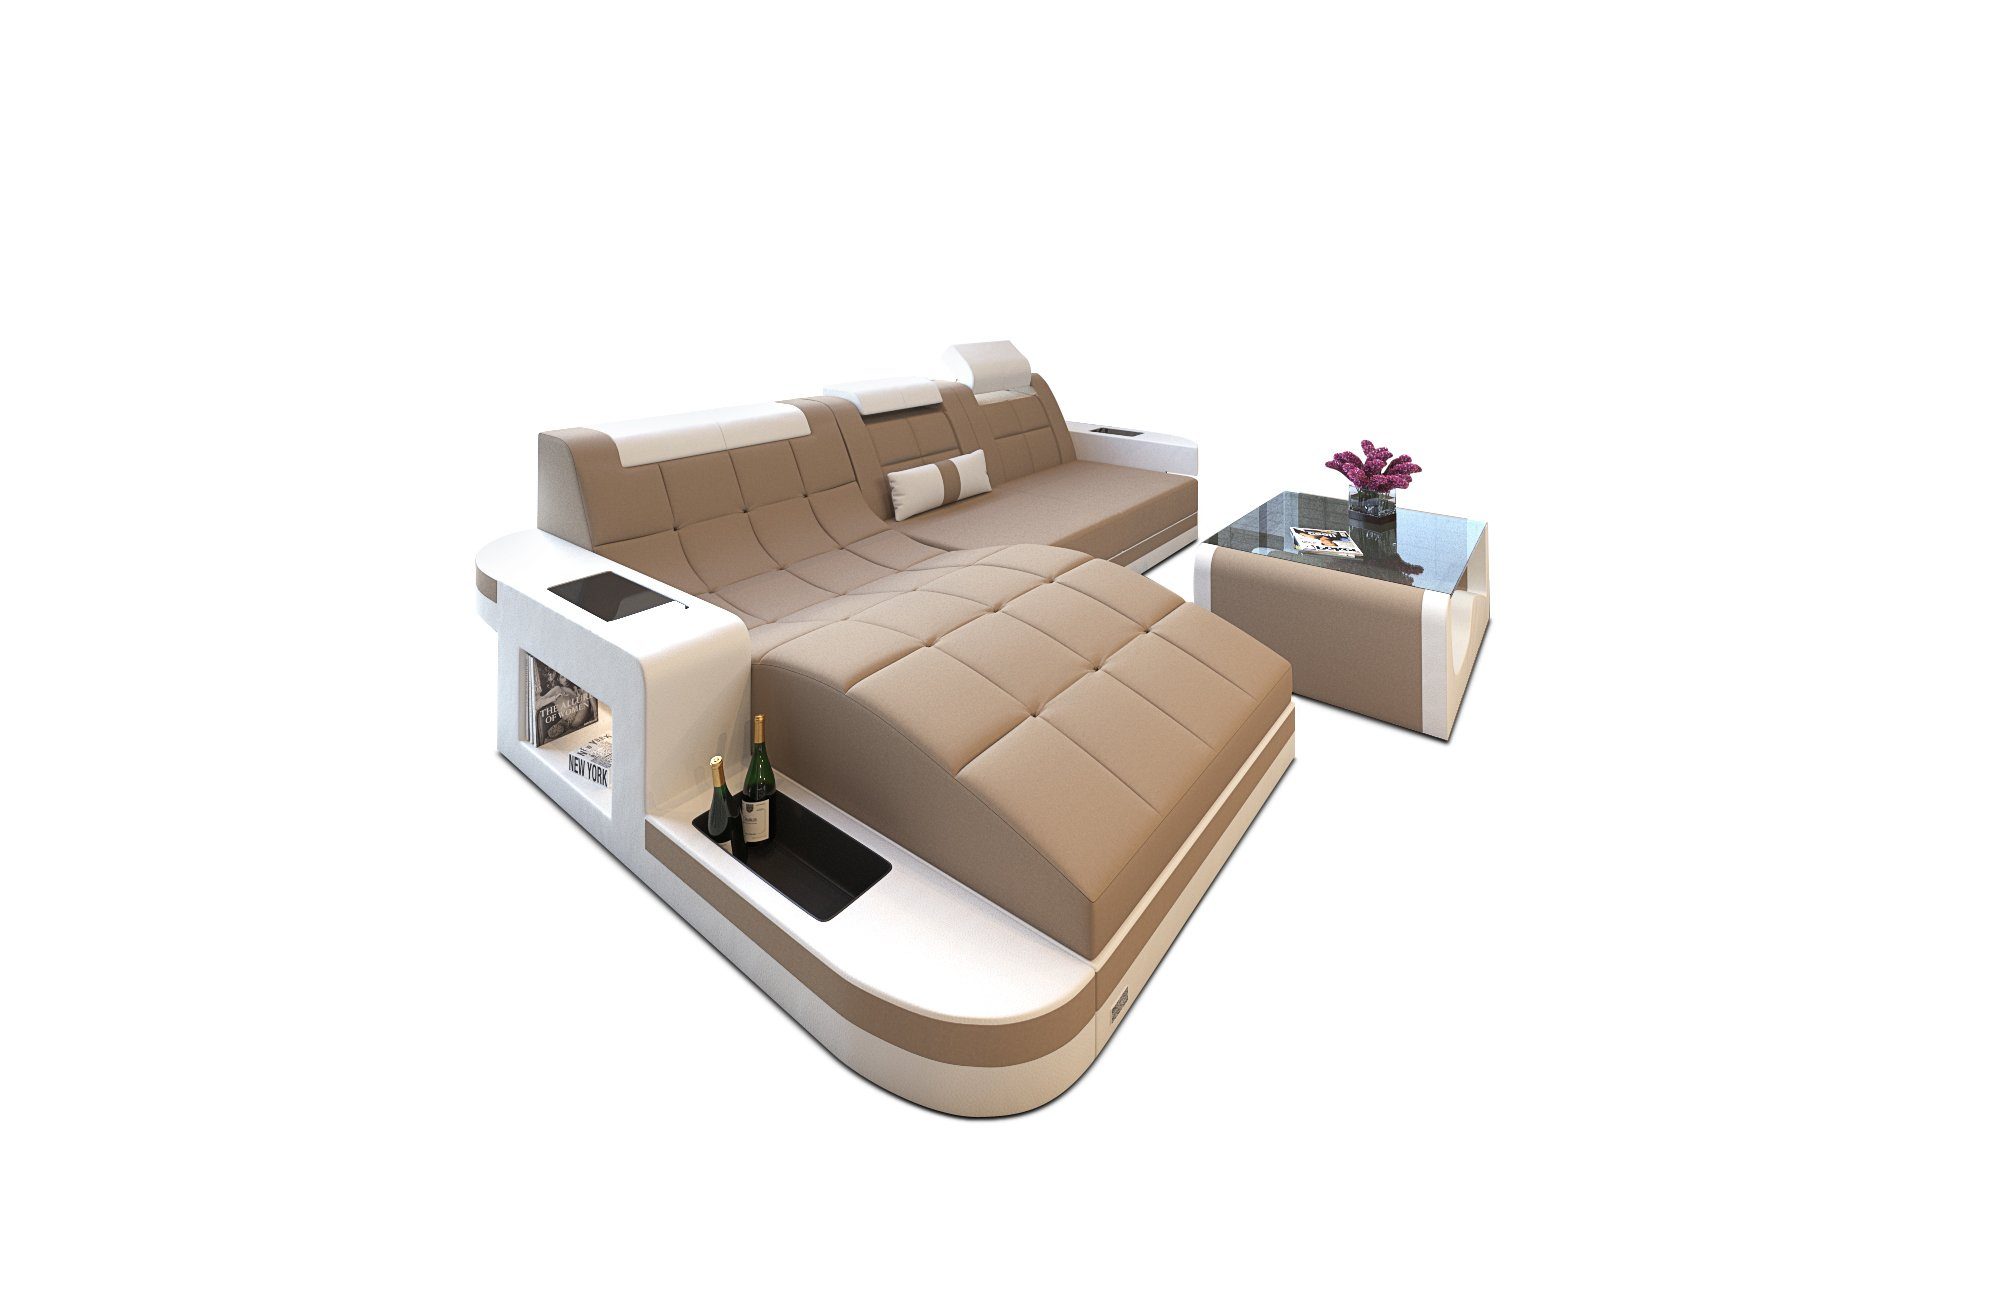 Form Bettfunktion Stoff cappuccino-weiß mit Mikrofaser Dreams Ecksofa Sofa, L Stoffsofa LED, L-Form M Wave Stoffsofa wahlweise Couch Sofa Sofa Polstercouch mit